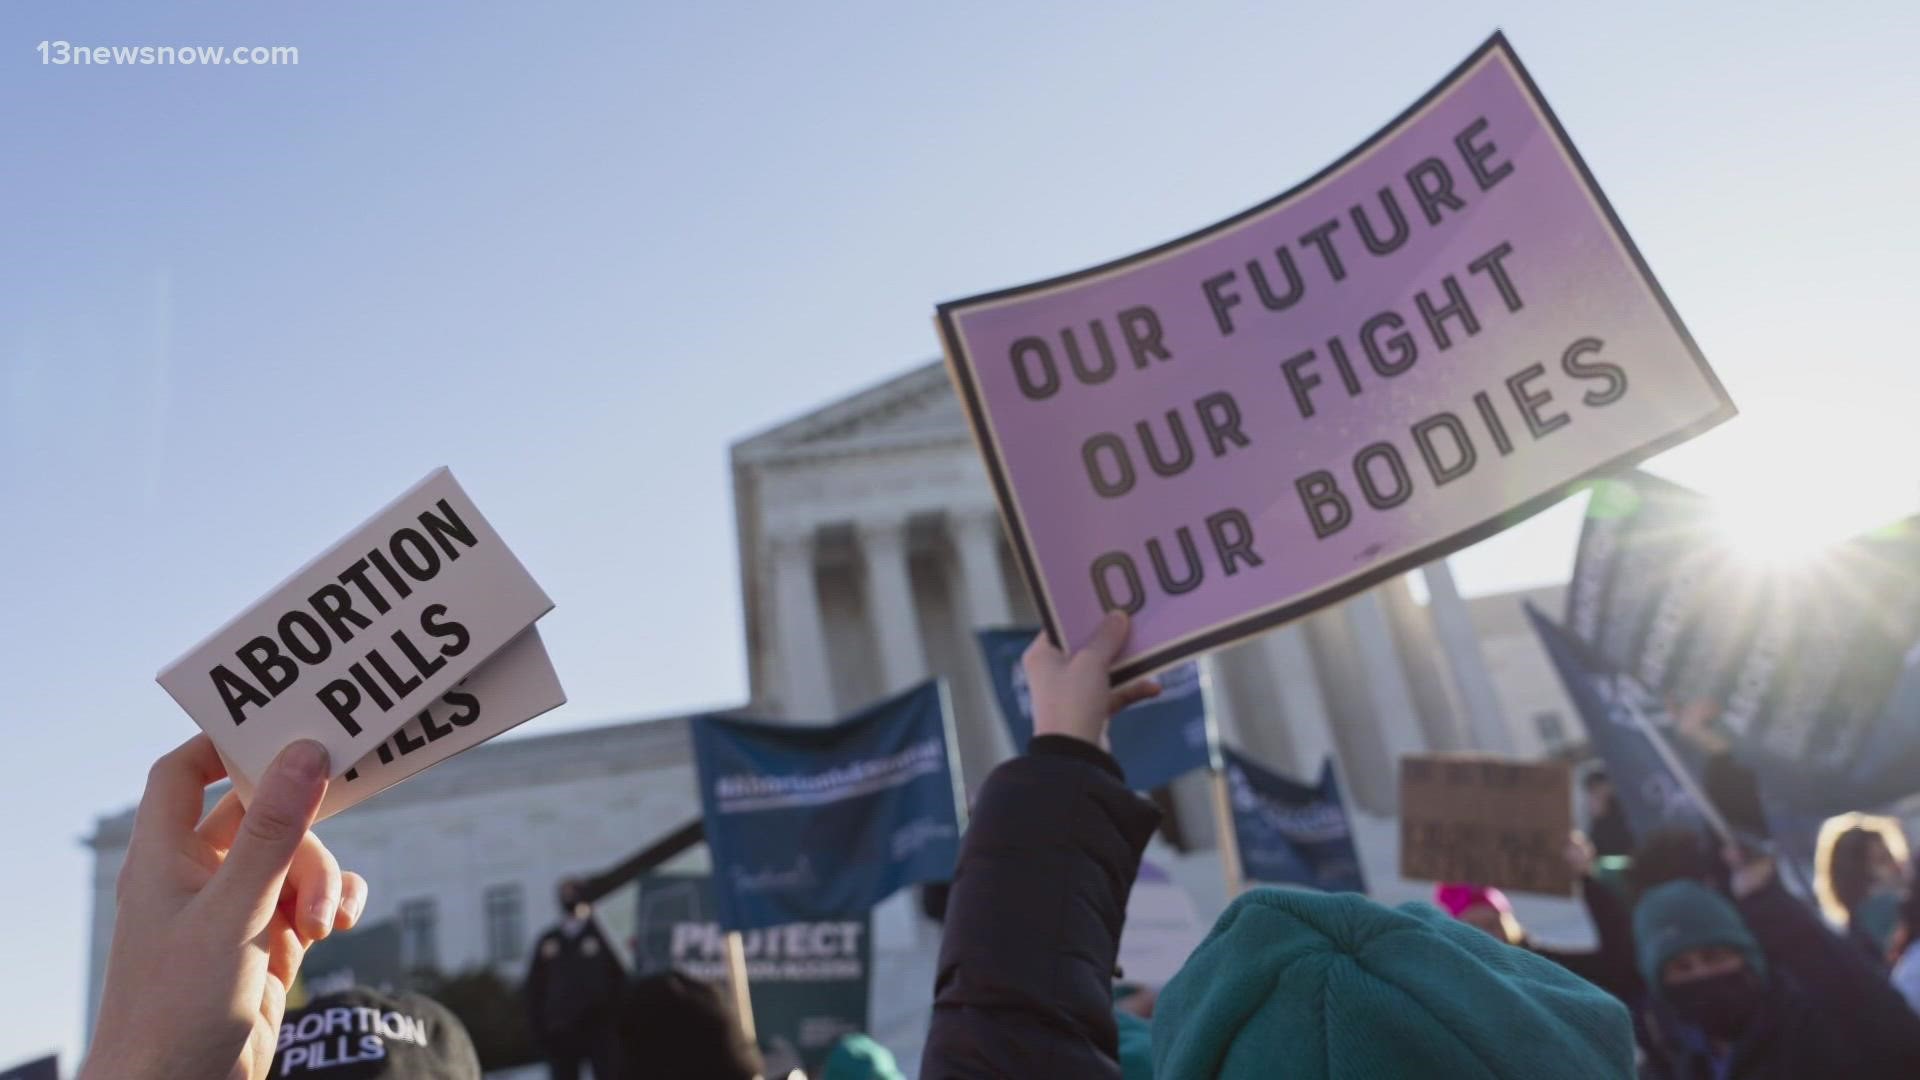 If Roe is overturned, it would create a system where each state decides their own abortion rules. But can a state stop its citizens from traveling for abortions?